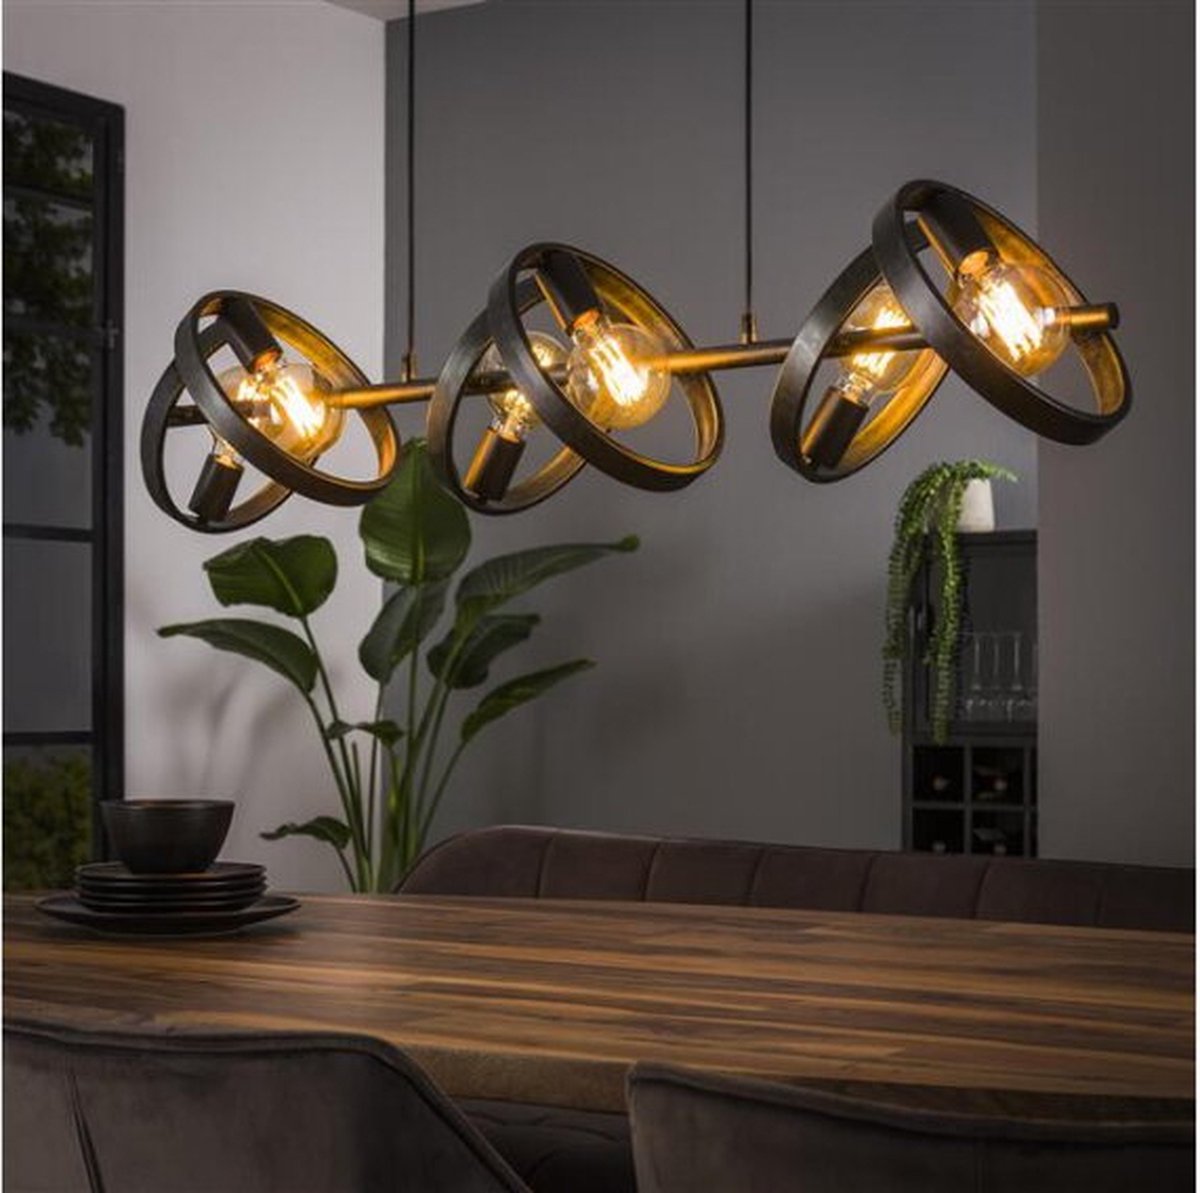 Hanglamp Hover 6 lampen - Charcoal